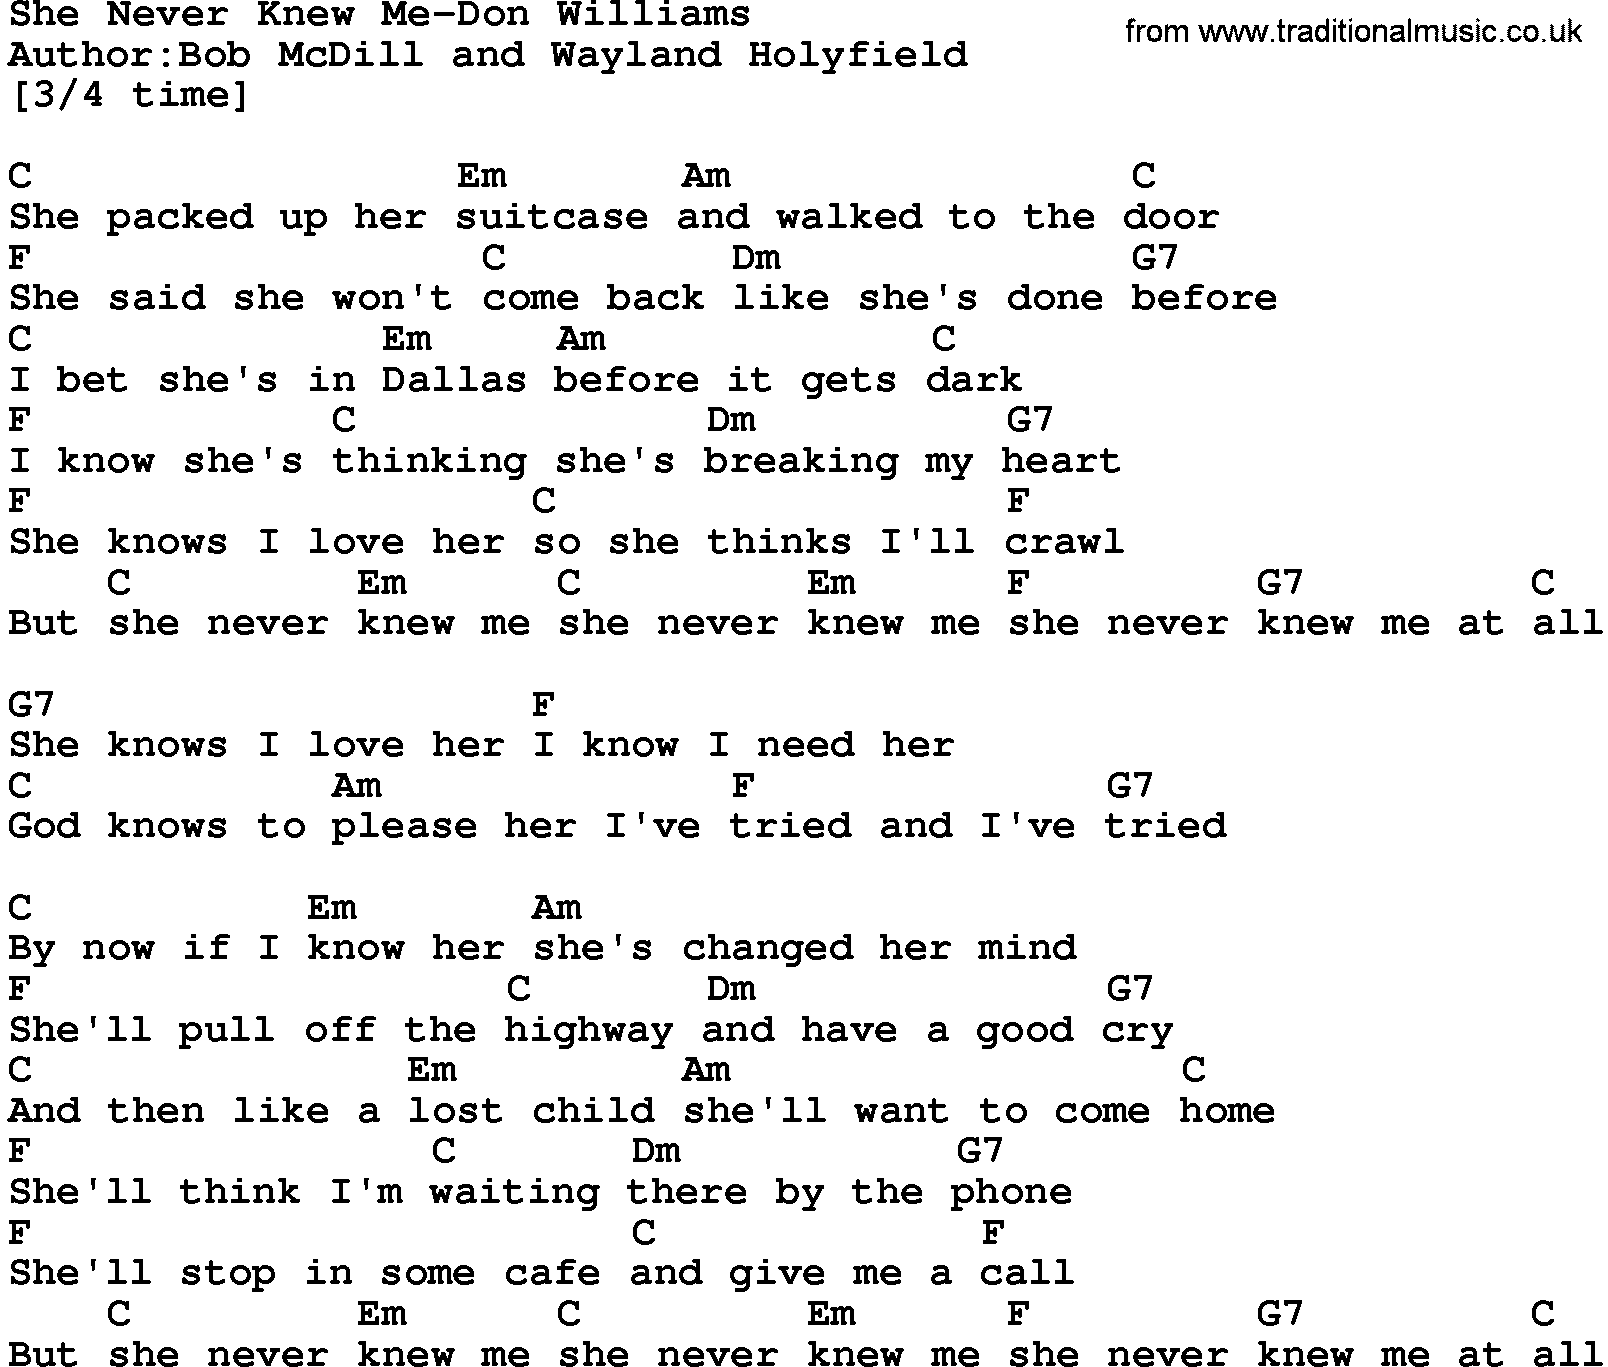 Country music song: She Never Knew Me-Don Williams lyrics and chords